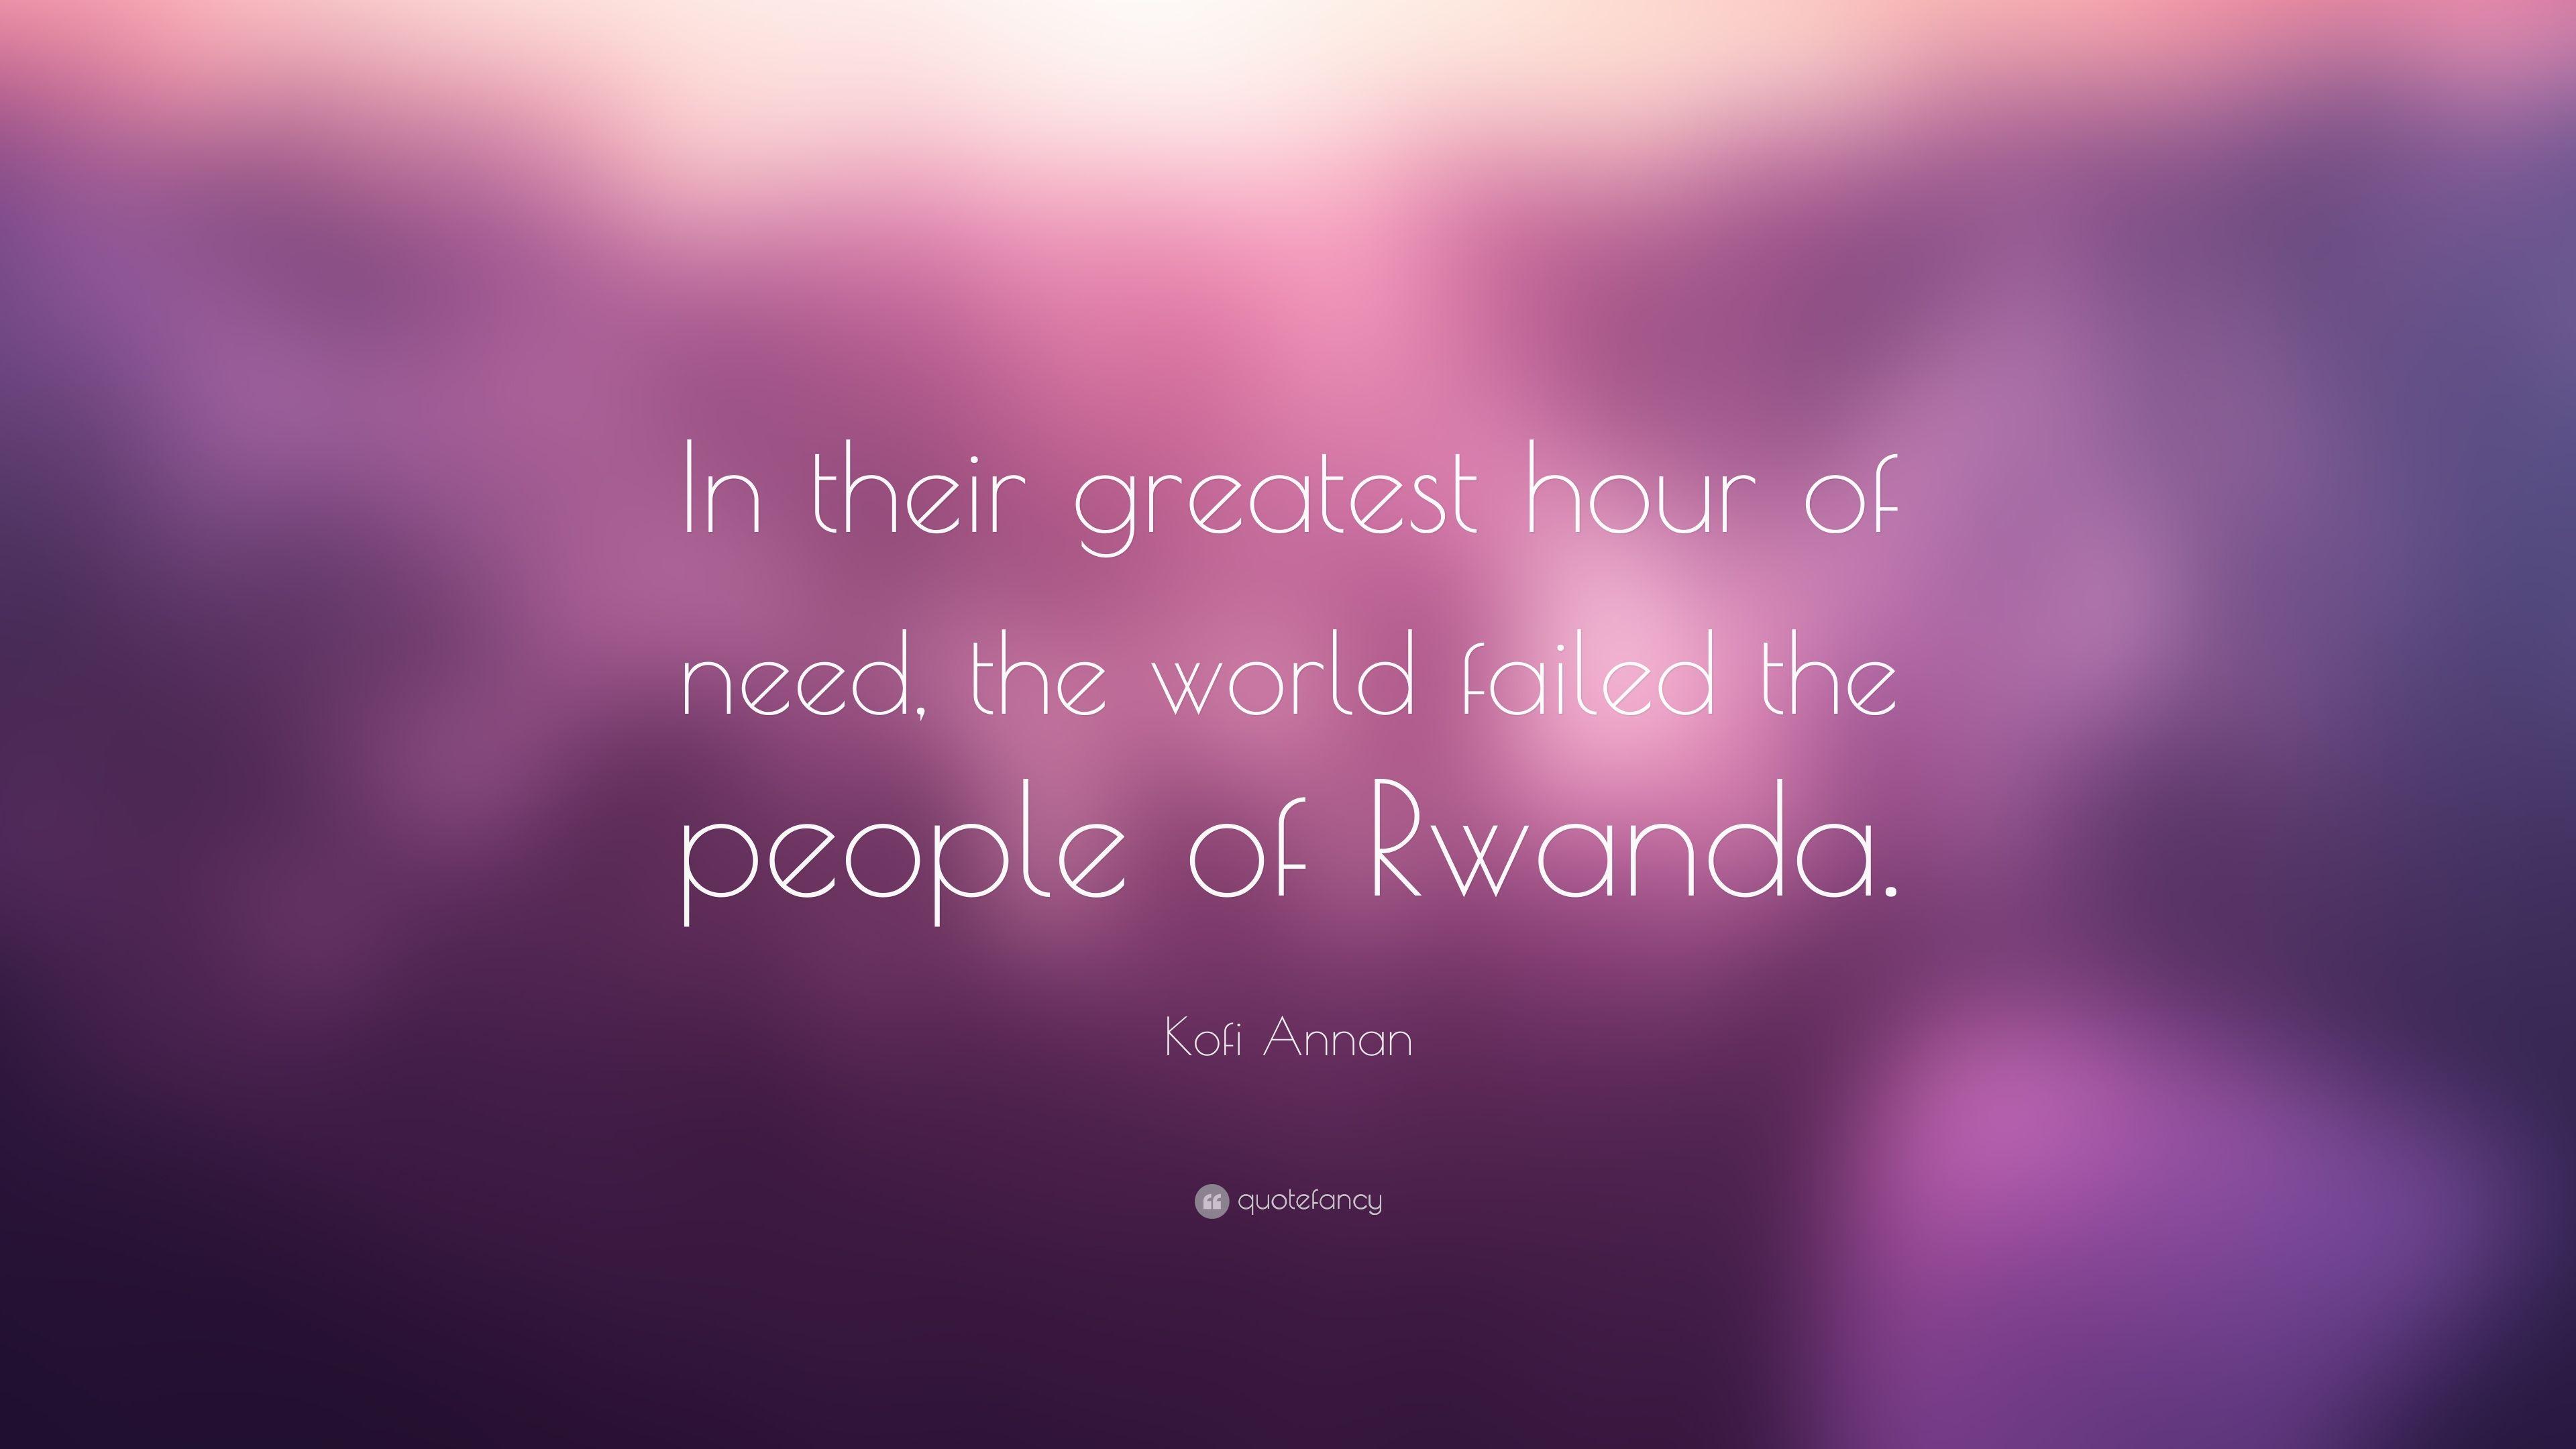 Kofi Annan Quote: “In their greatest hour of need, the world